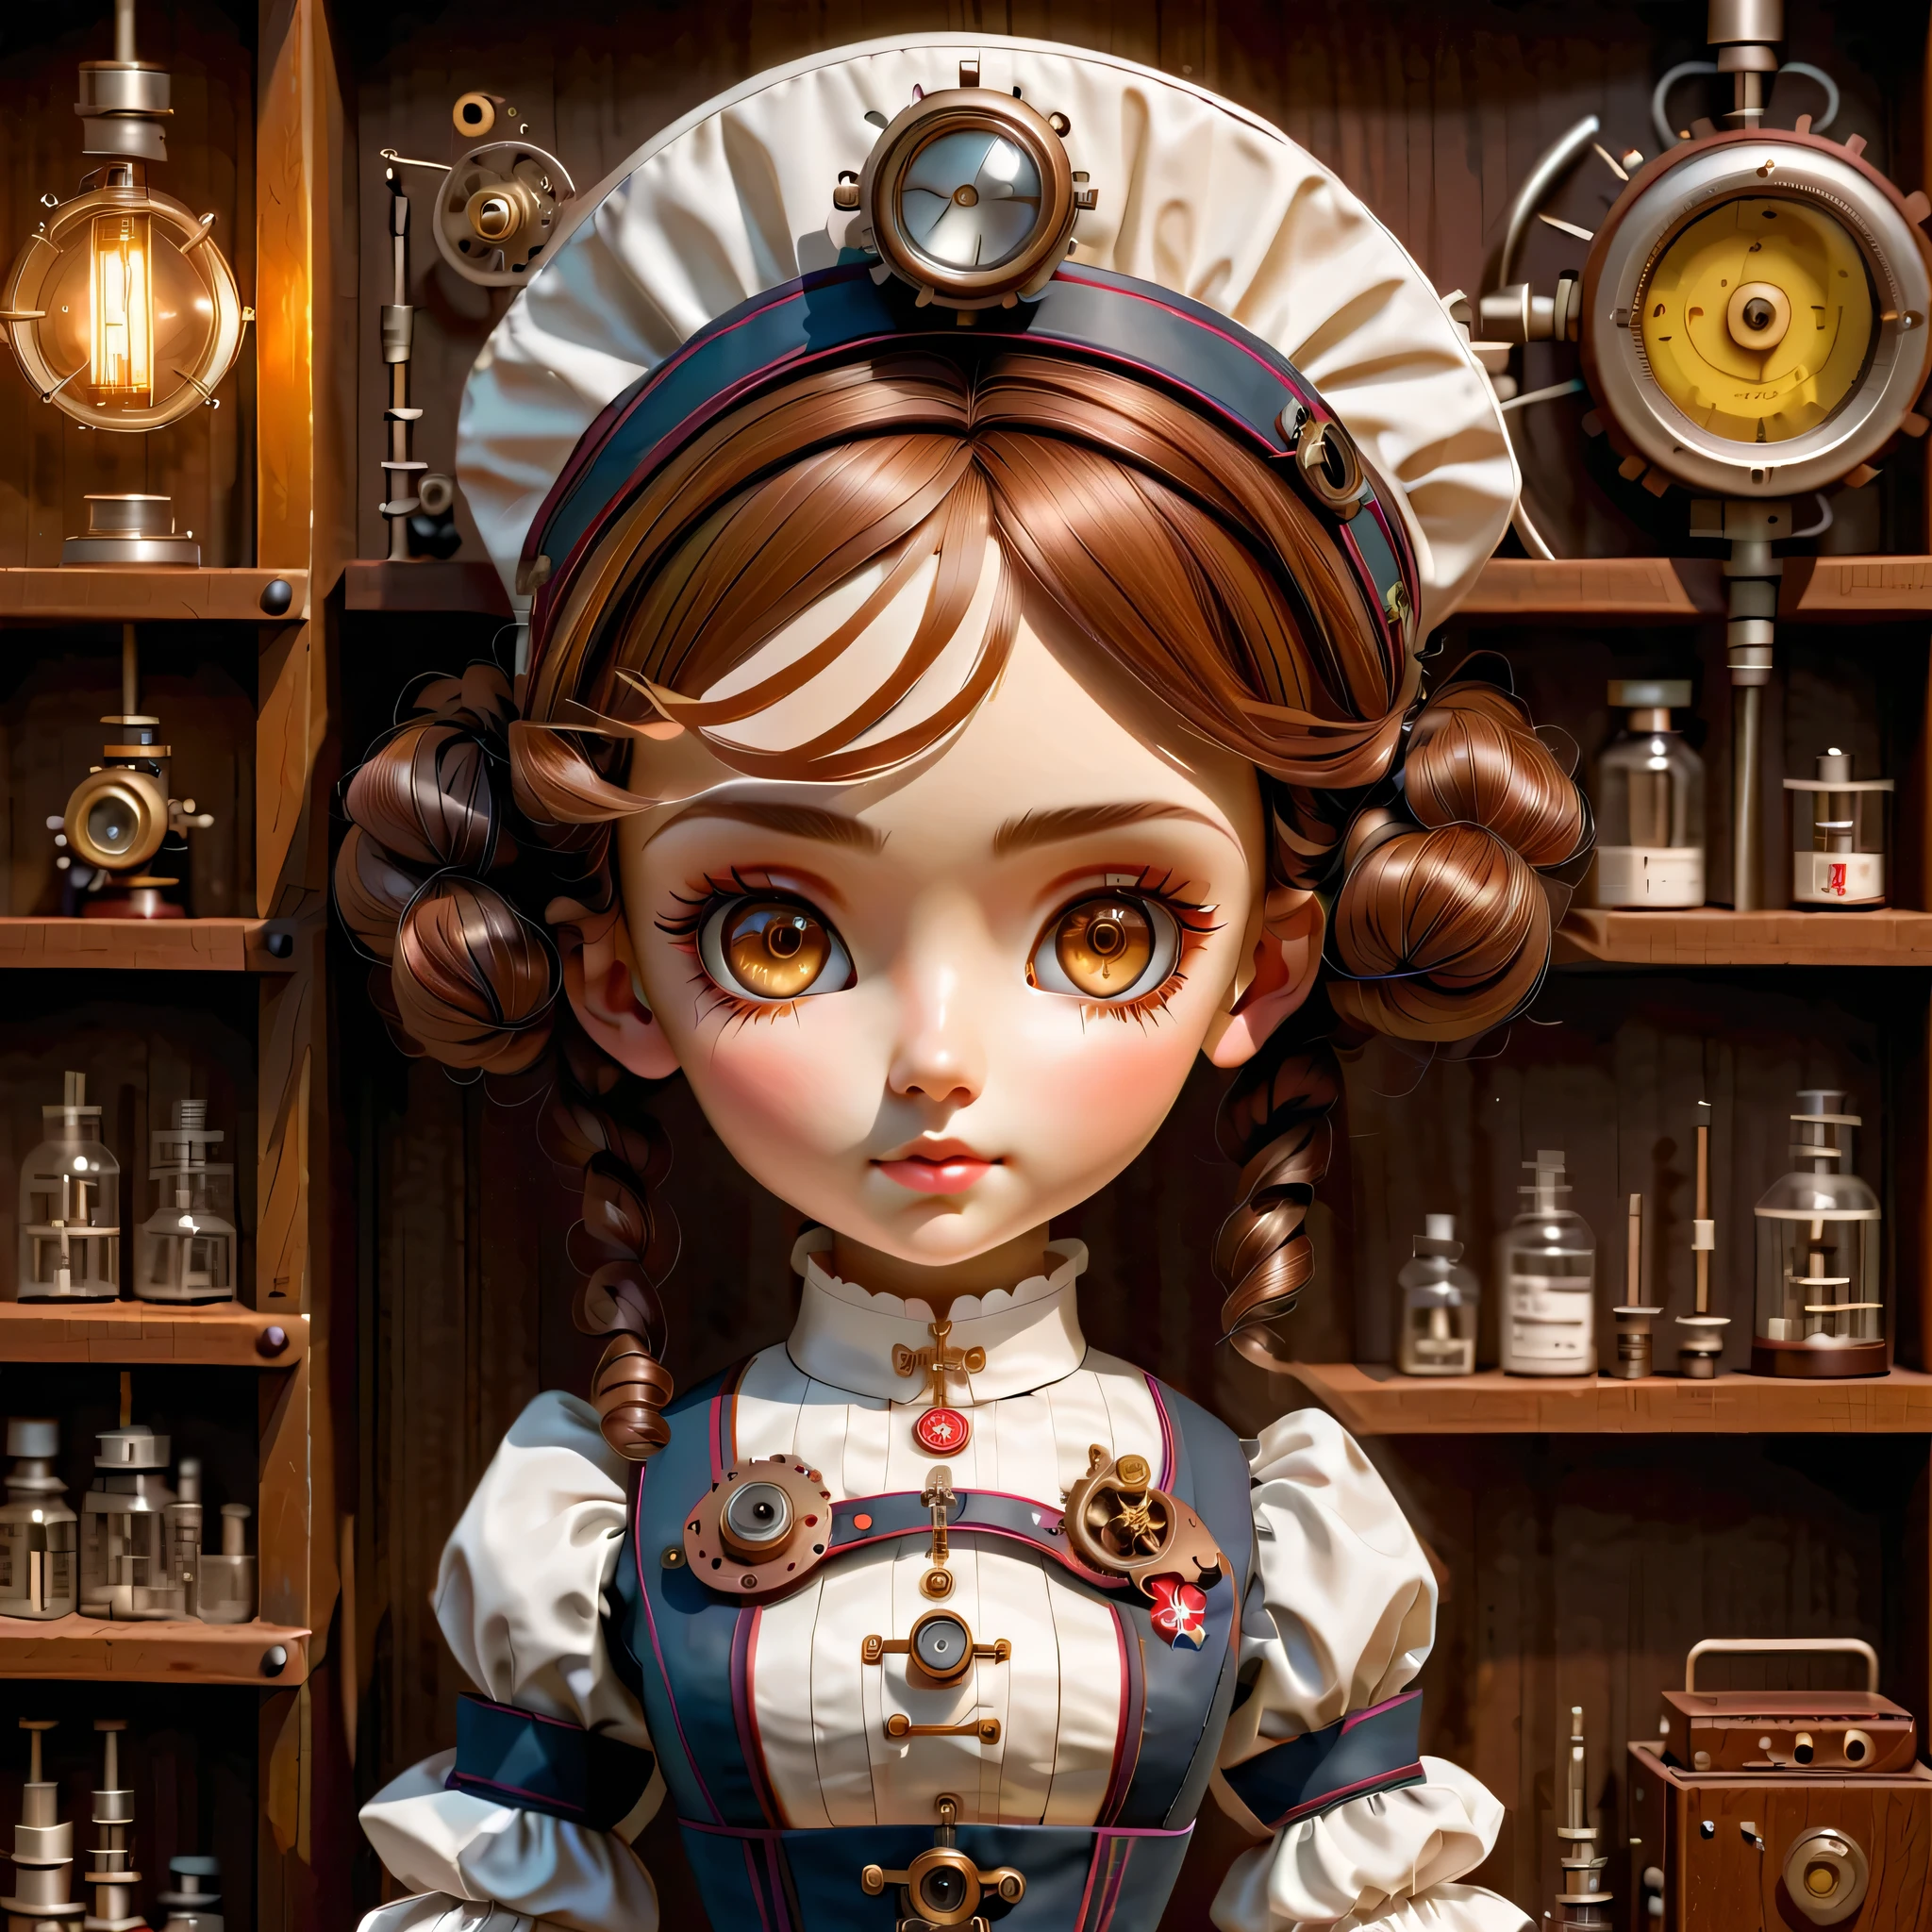 mechanism:humanoid:nurse:16th century European nurse uniform,doll face:perfect face:big brown eyes,eyelash,hide hair wires,she is made of machinery,Steampunk element,Mechanical engineering,Mechanically,Mechanical,pop,cute,intricate details,very fine,High resolution,high quality,最high quality,clearly,Be clear,beautiful light and shadow,Three dimensions,adorable appearance,complex configuration,mechanism,dynamic,busy,Work hard,An expression that makes you want to support,Medical equipment,medical supplies shelf,vial,show evidence that it is a machine,light from window,character design sheet